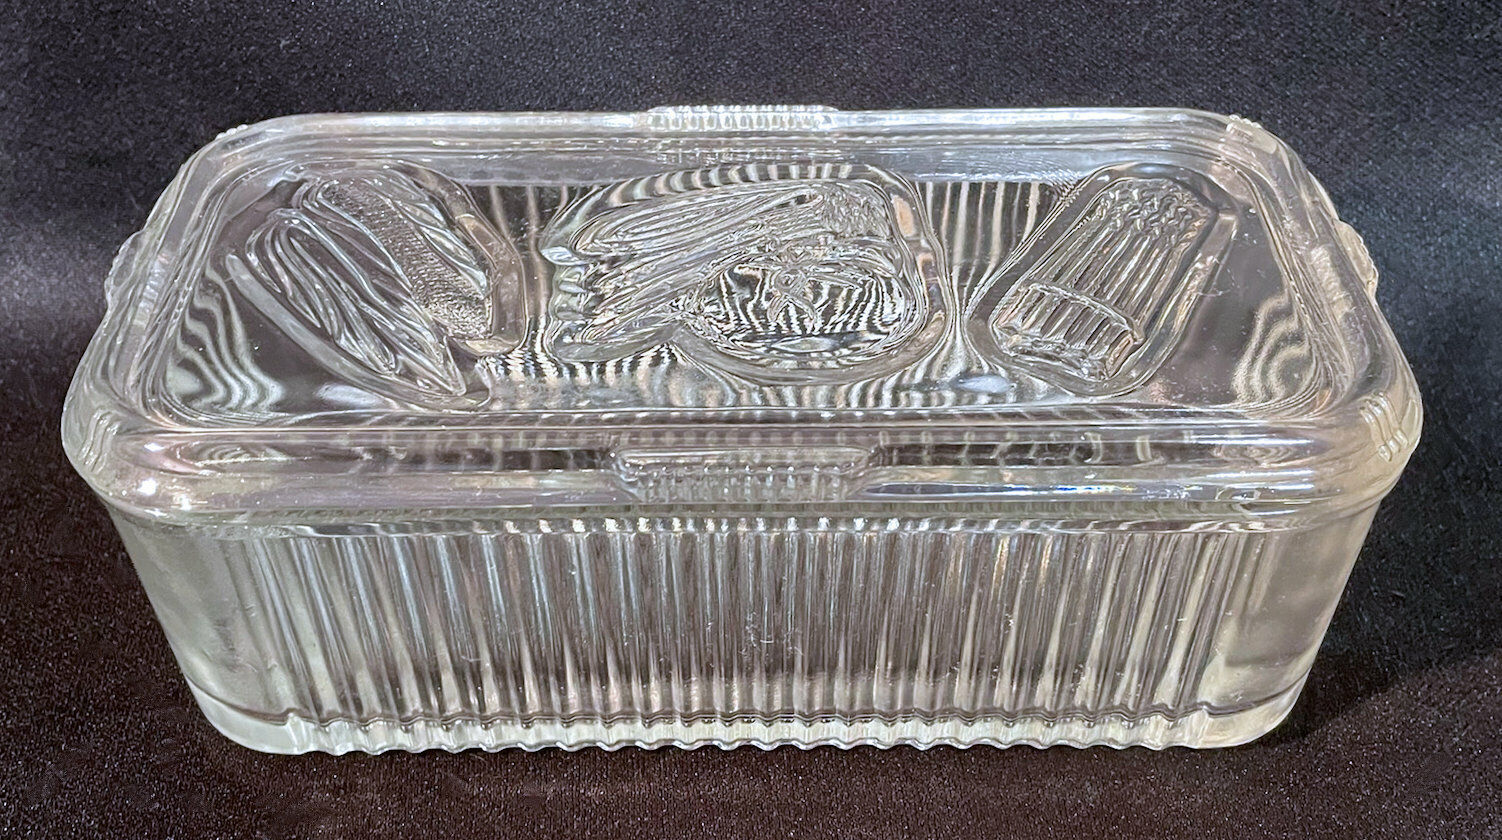 Primary image for FEDERAL GLASS VEGETABLE PATTERN REFRIGERATOR DISH w/LID & RIBBED SIDES